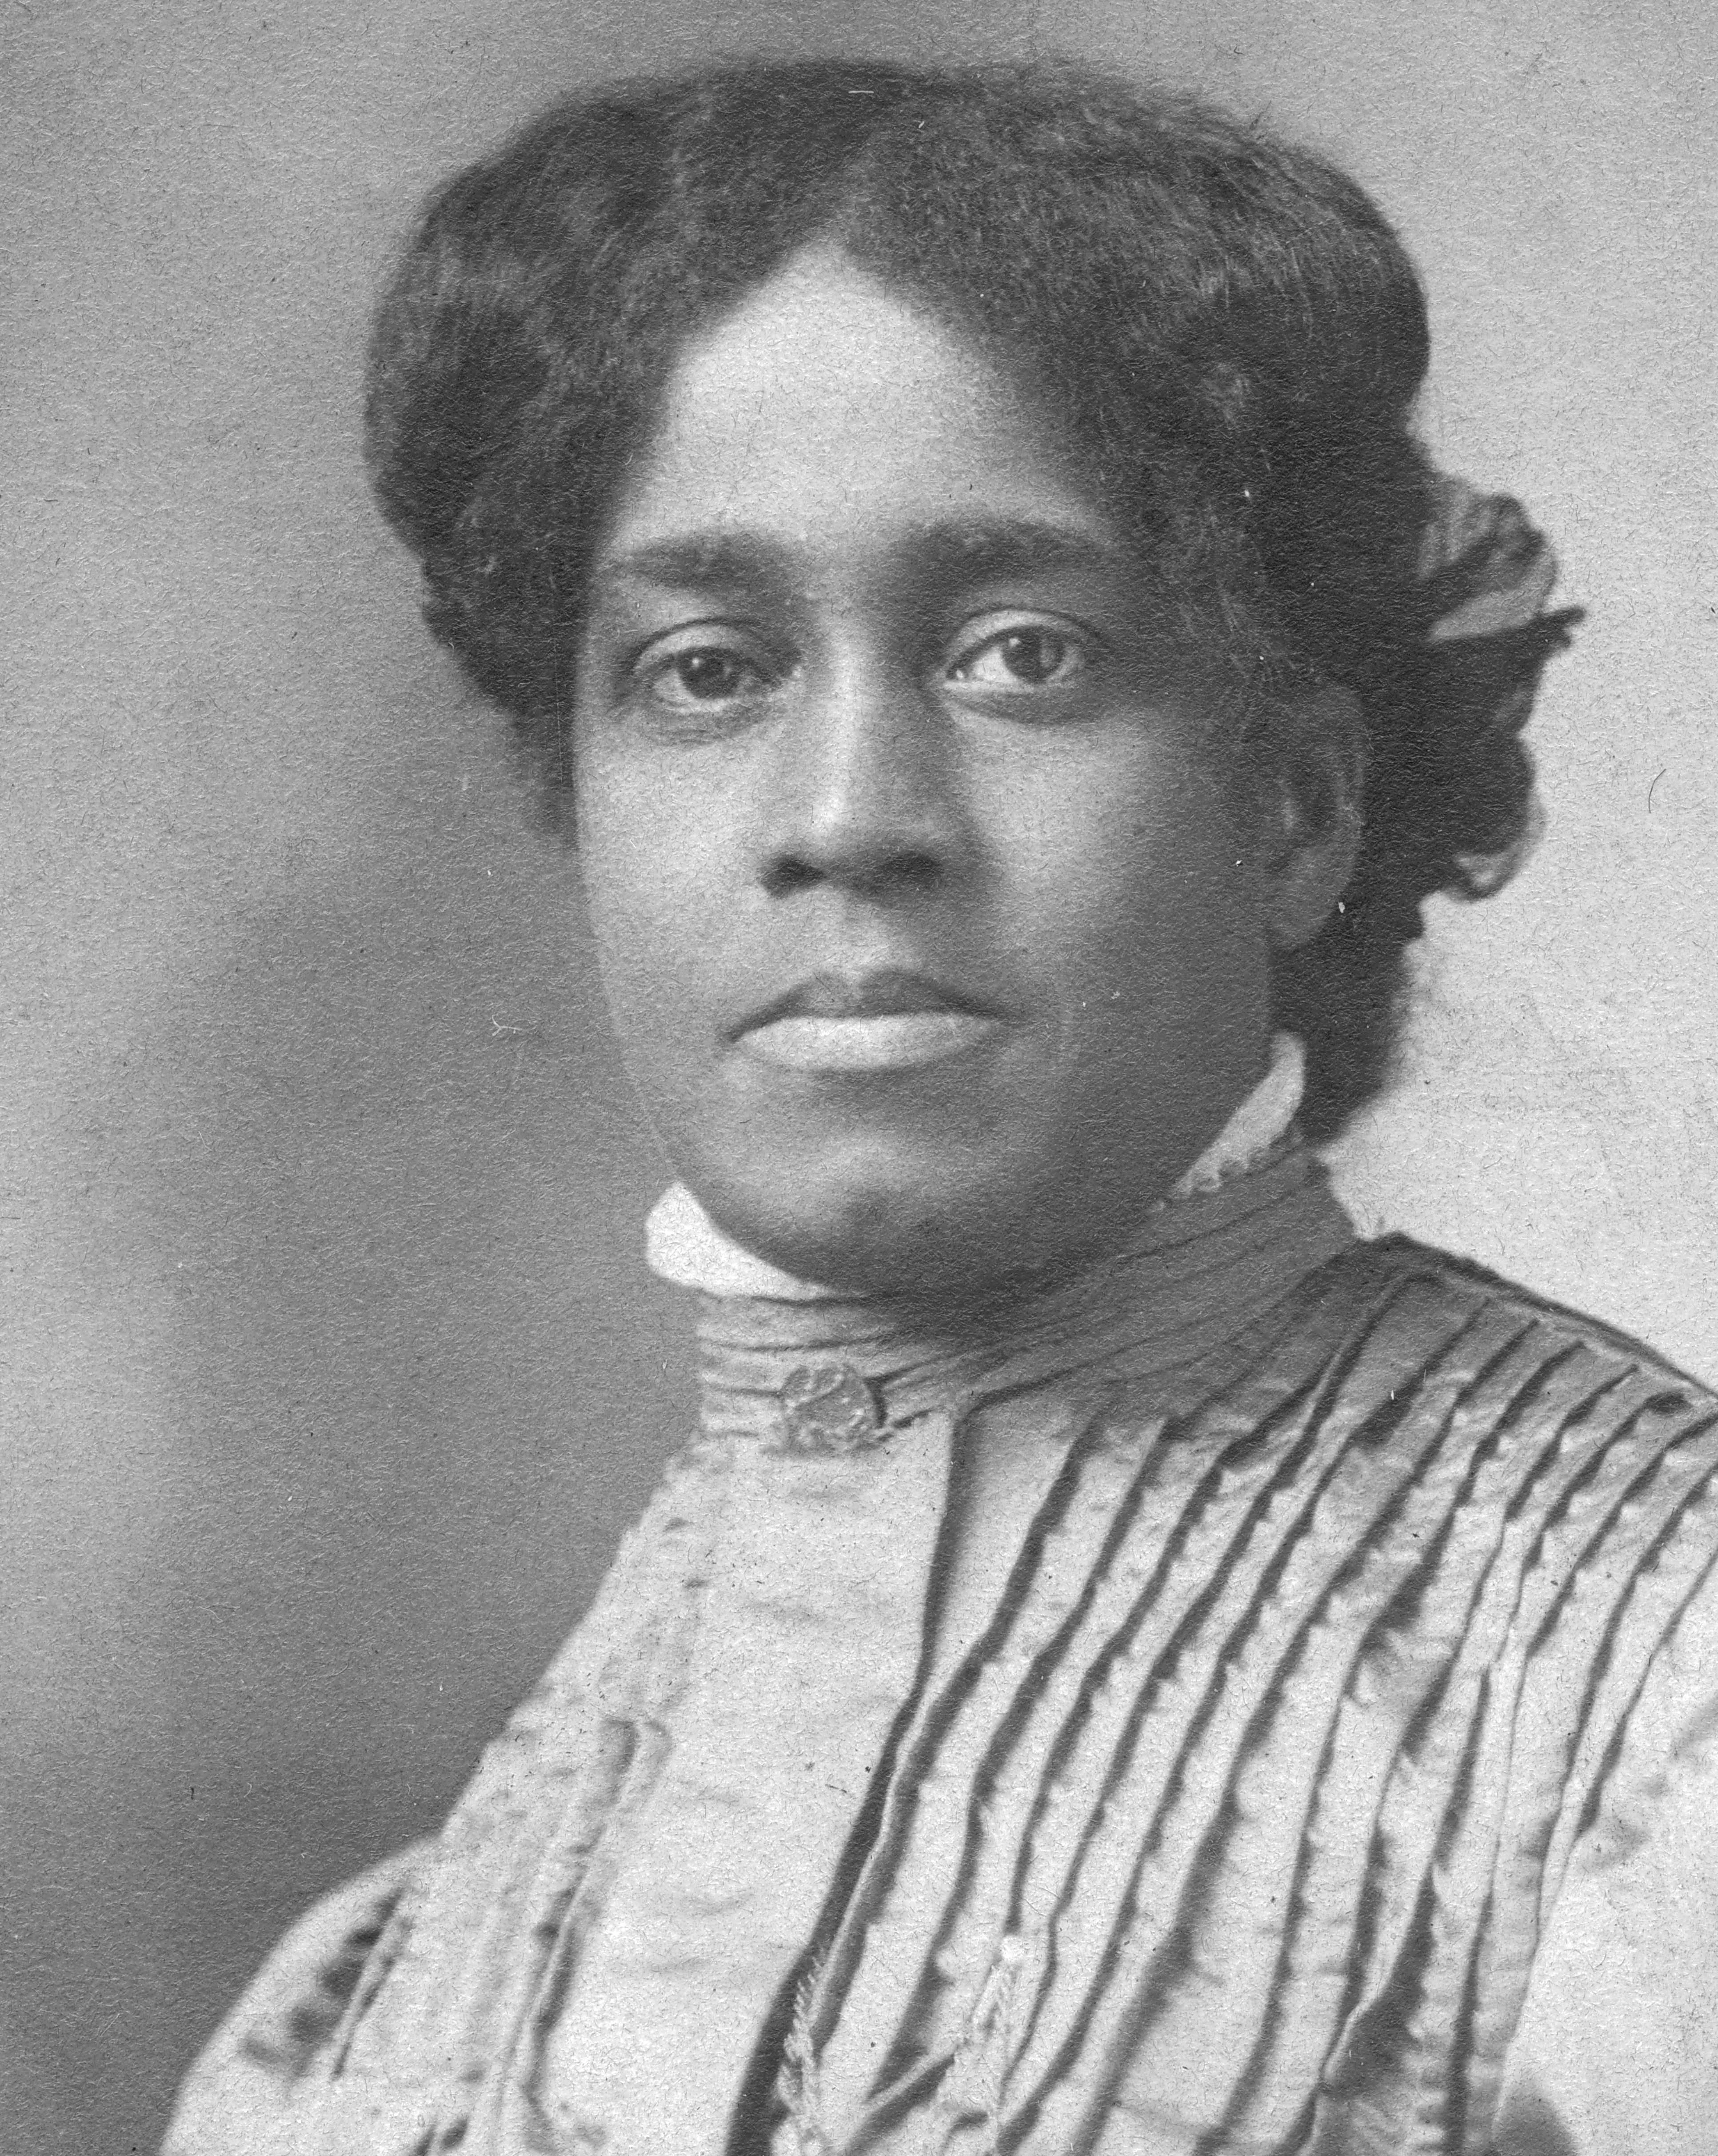 Black and white photo of a Black woman looking confidently into the camera. Her hair is parted down the middle and pulled back. Her dress comes up to her neck and is silk or another kind of shiny fabric, with many ironed pleats.